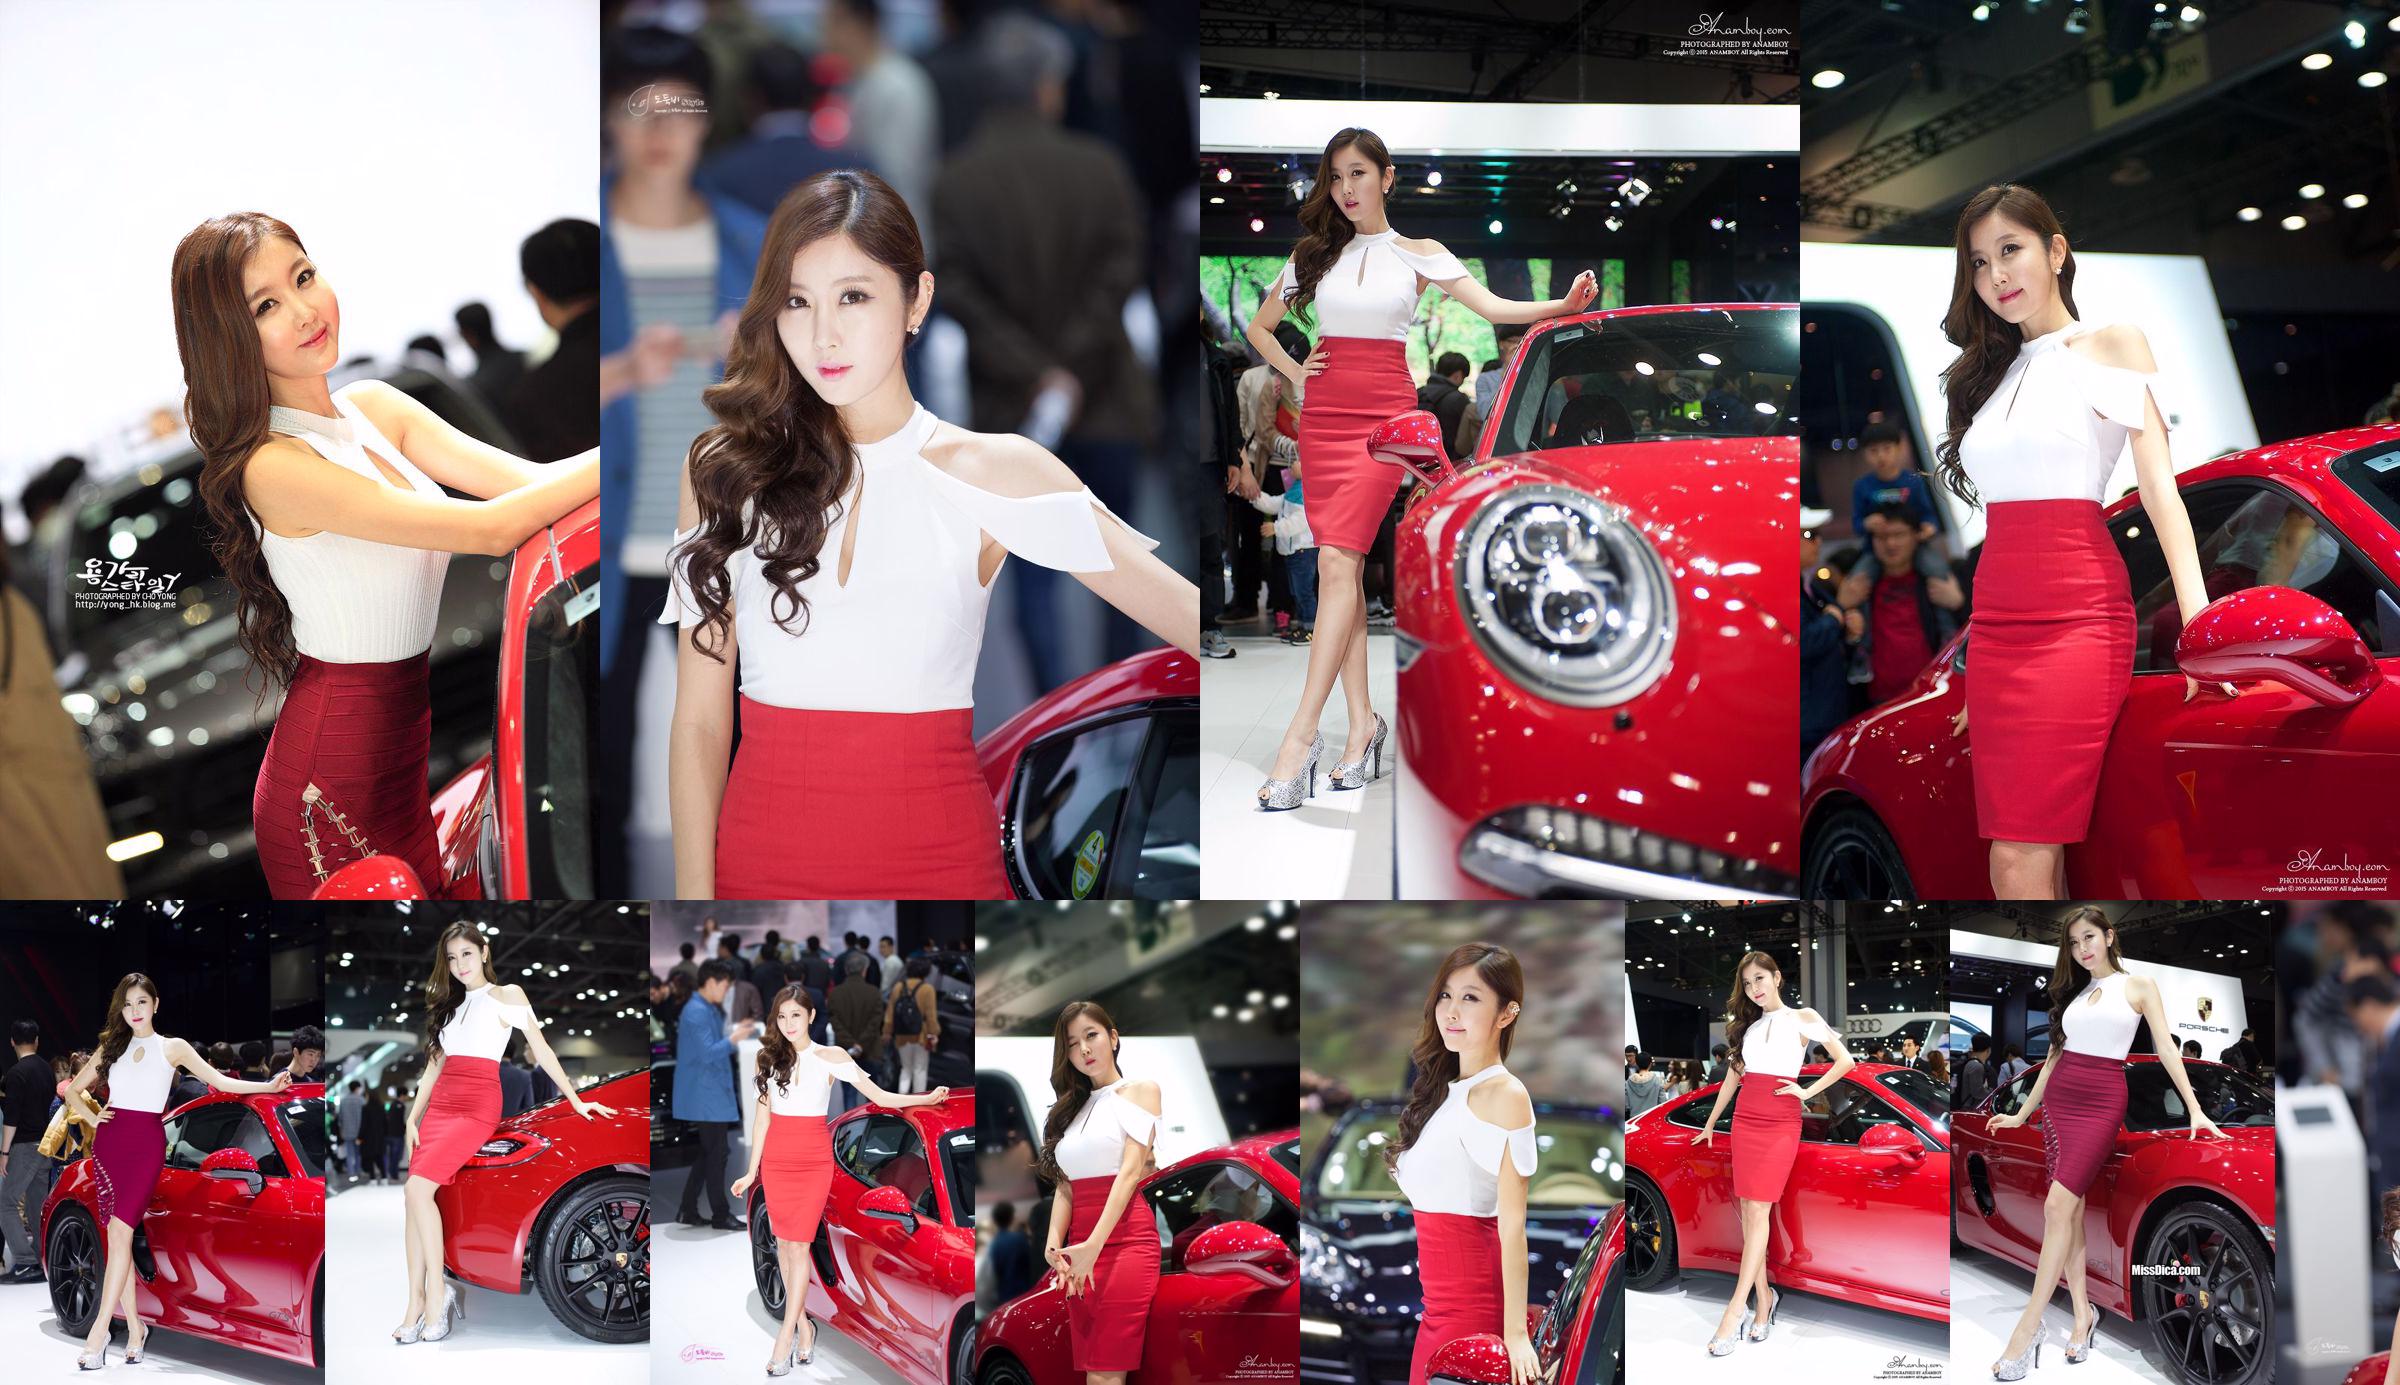 Photo Collection of Korean Car Model Cui Xingya/Cui Xinger's "Red Skirt Series at Auto Show" No.fcf12b Page 3